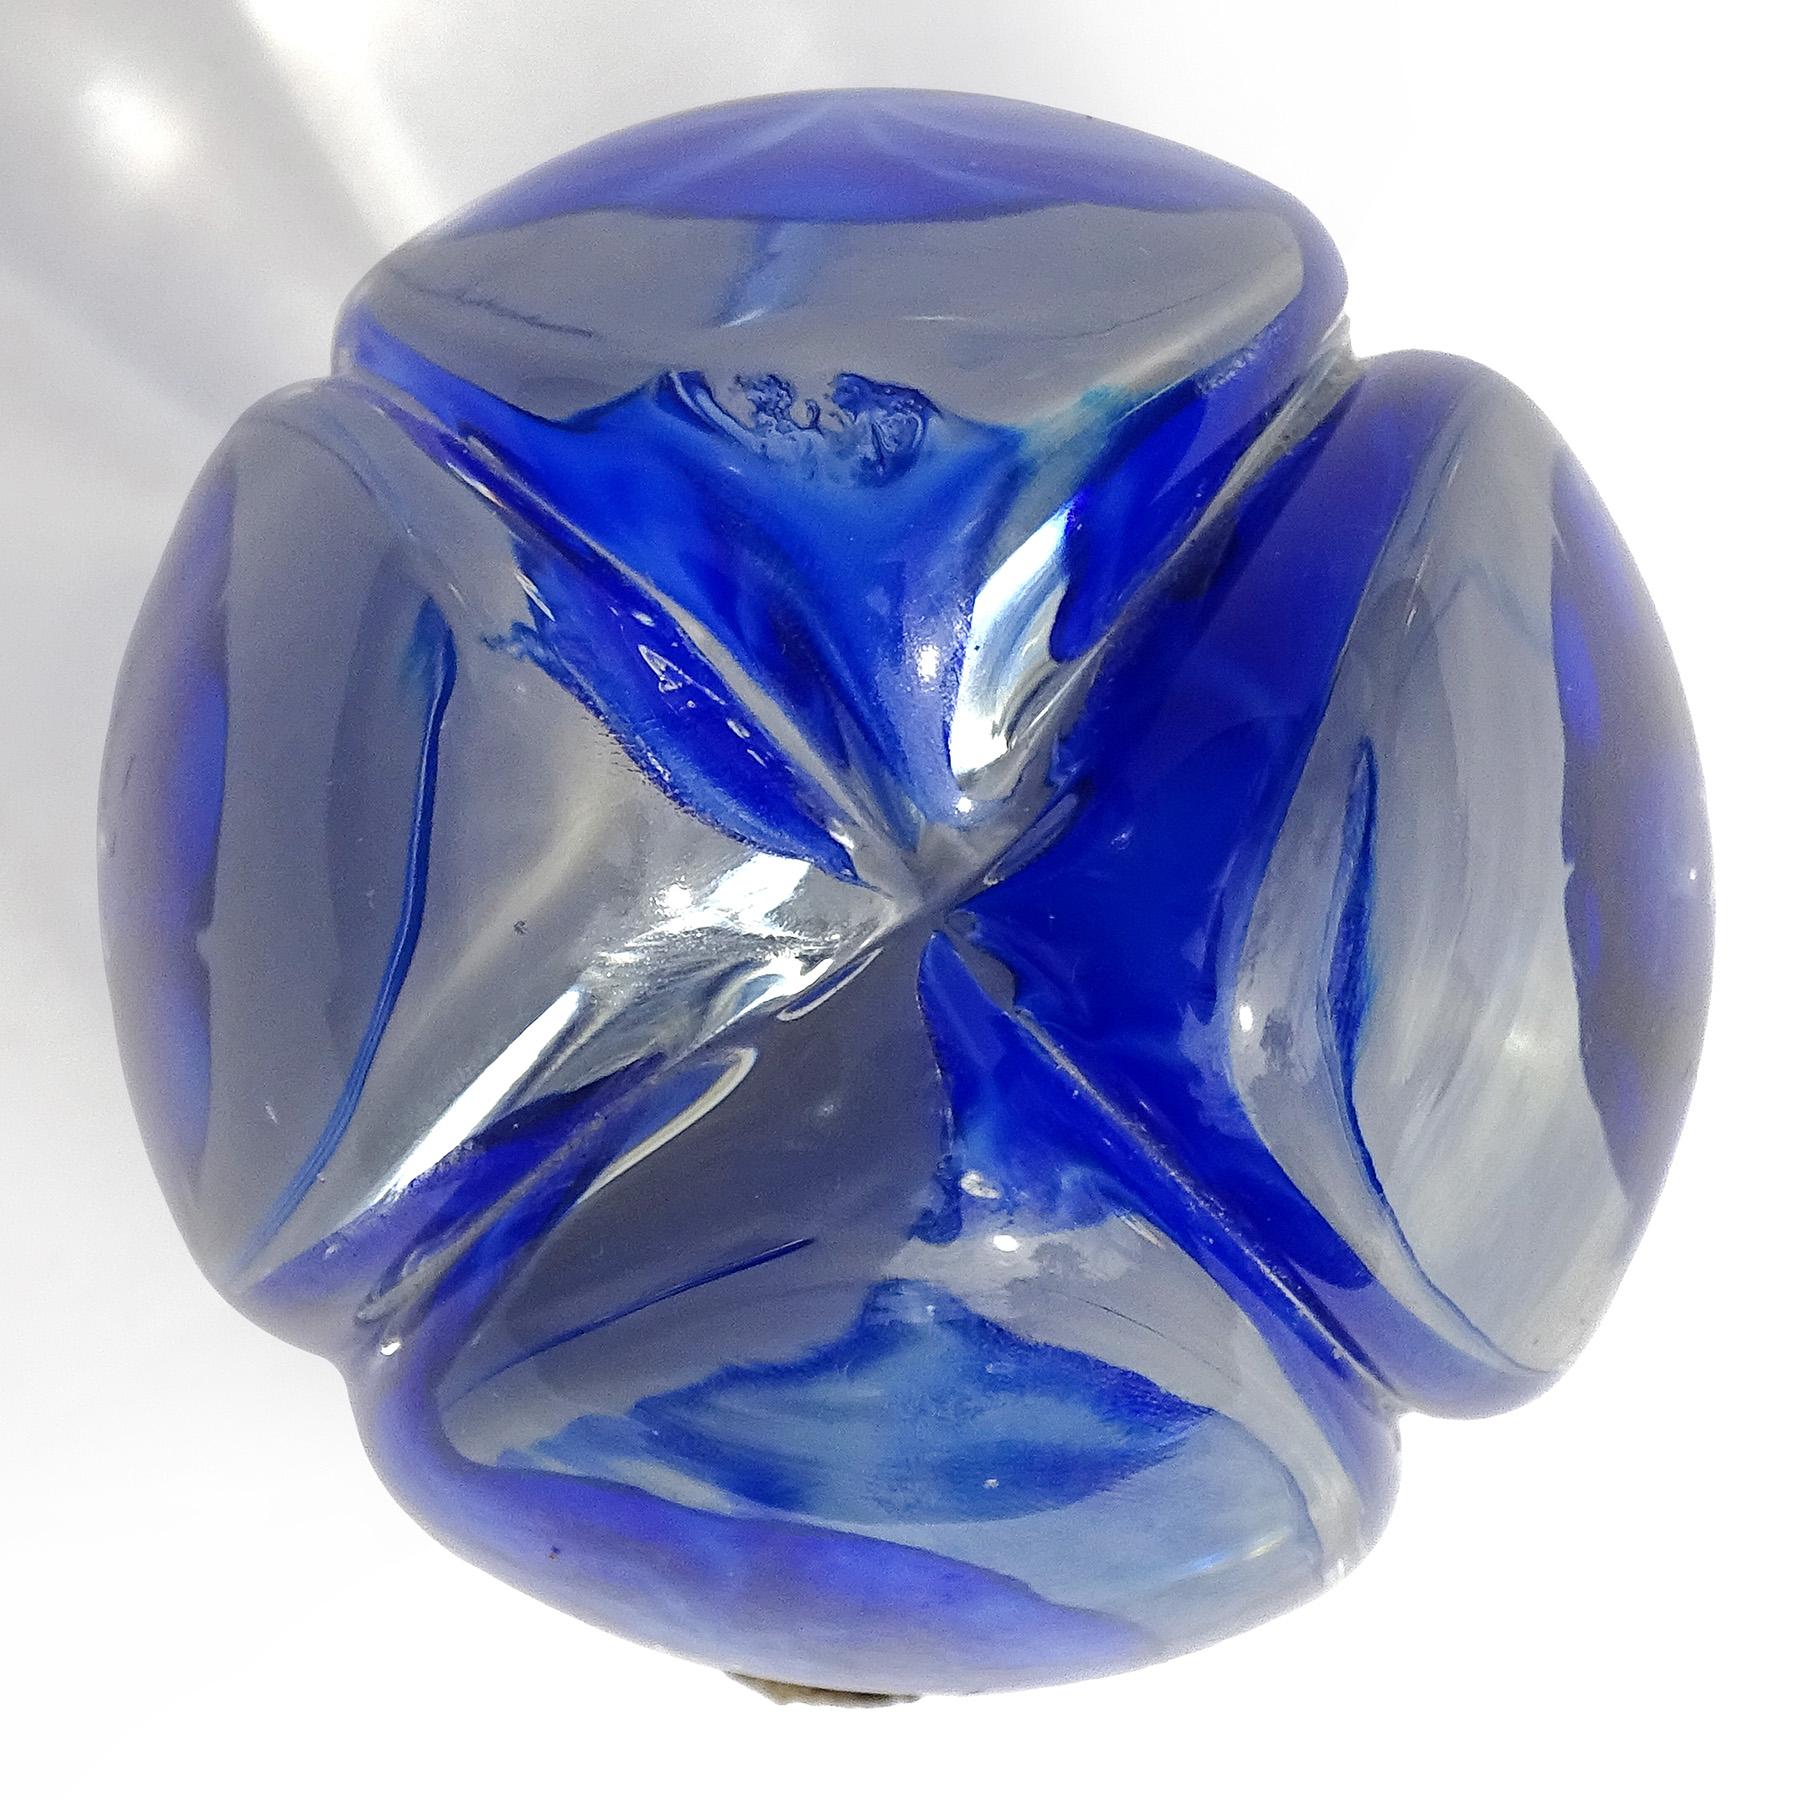 Fratelli Toso Murano Cobalt Blue Flowers Italian Art Glass Tall Paperweight In Good Condition For Sale In Kissimmee, FL